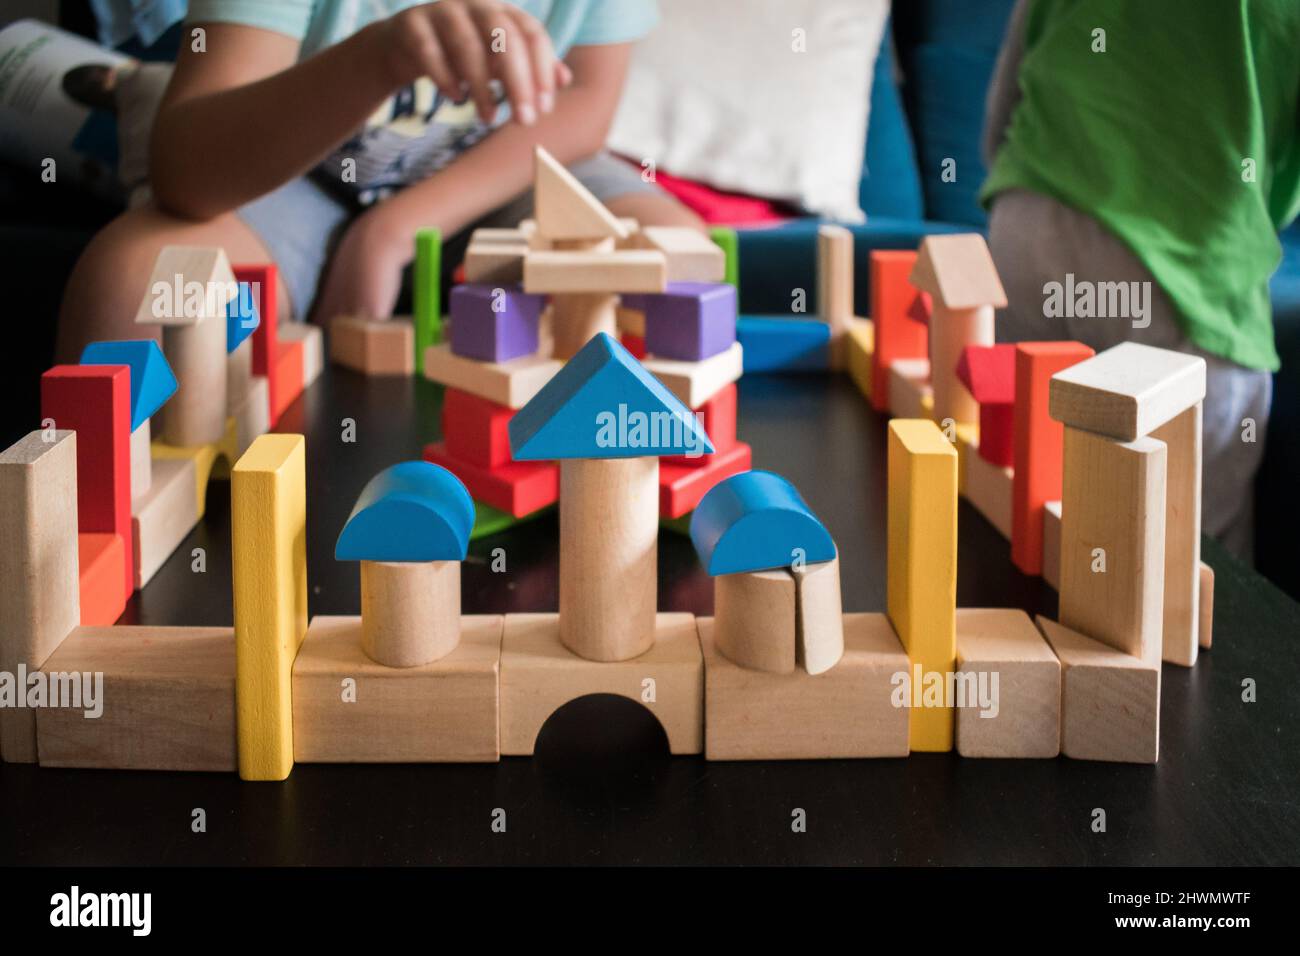 Boy playing with wooden blocks Stock Photo